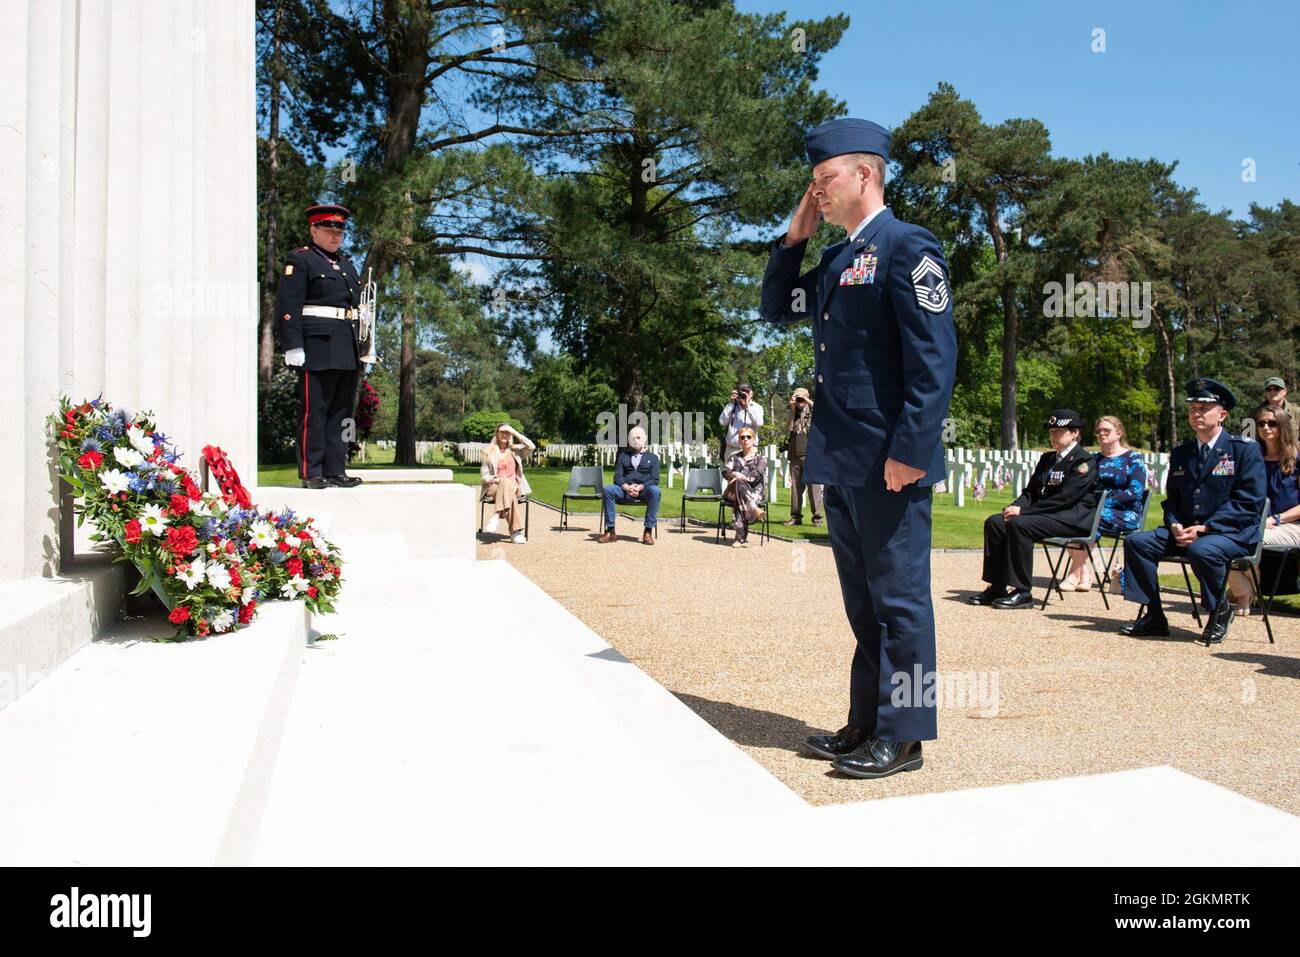 U.S. Air Force Chief Master Sgt. Michael Venning, 422nd Air Base Group superintendent, salutes at a 2021 Memorial Day ceremony at the Brookwood American Military Cemetery, England, May 30, 2021. Memorial Day is one of our Nation's most solemn occasions. It serves as a chance to pause, reflect, and honor the women and men who gave the last full measure defending our Nation and our democratic ideals. Stock Photo